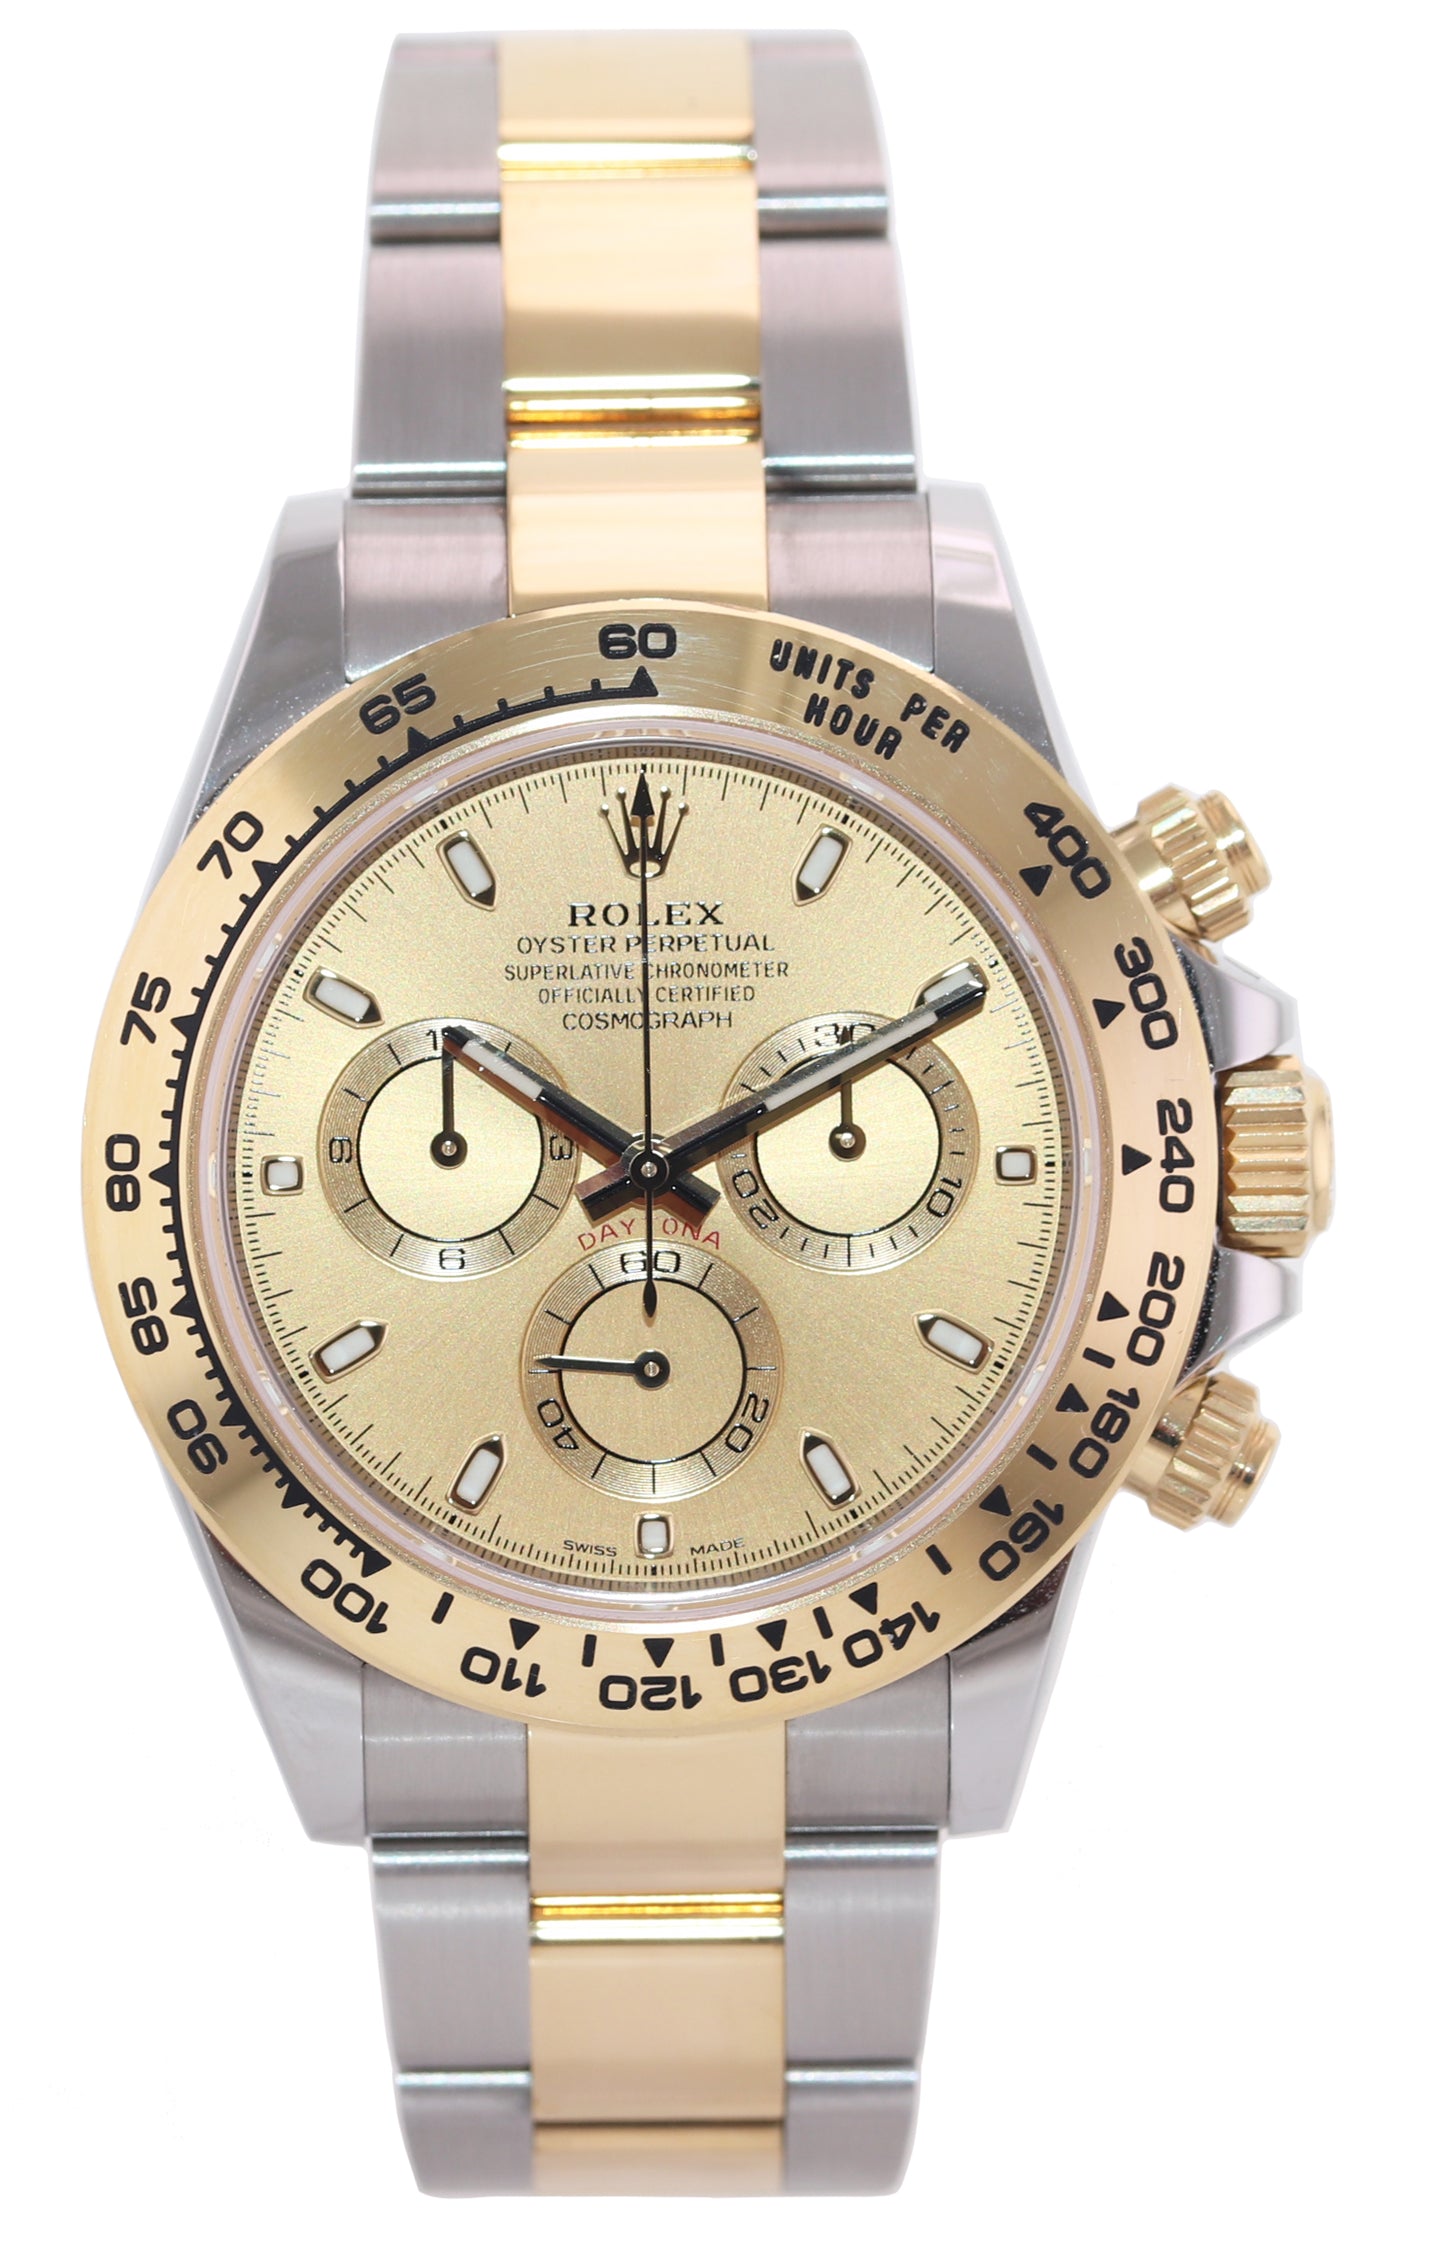 2022 NEW PAPERS Rolex Daytona 116503 Champagne Chrono Two Tone Gold Watch